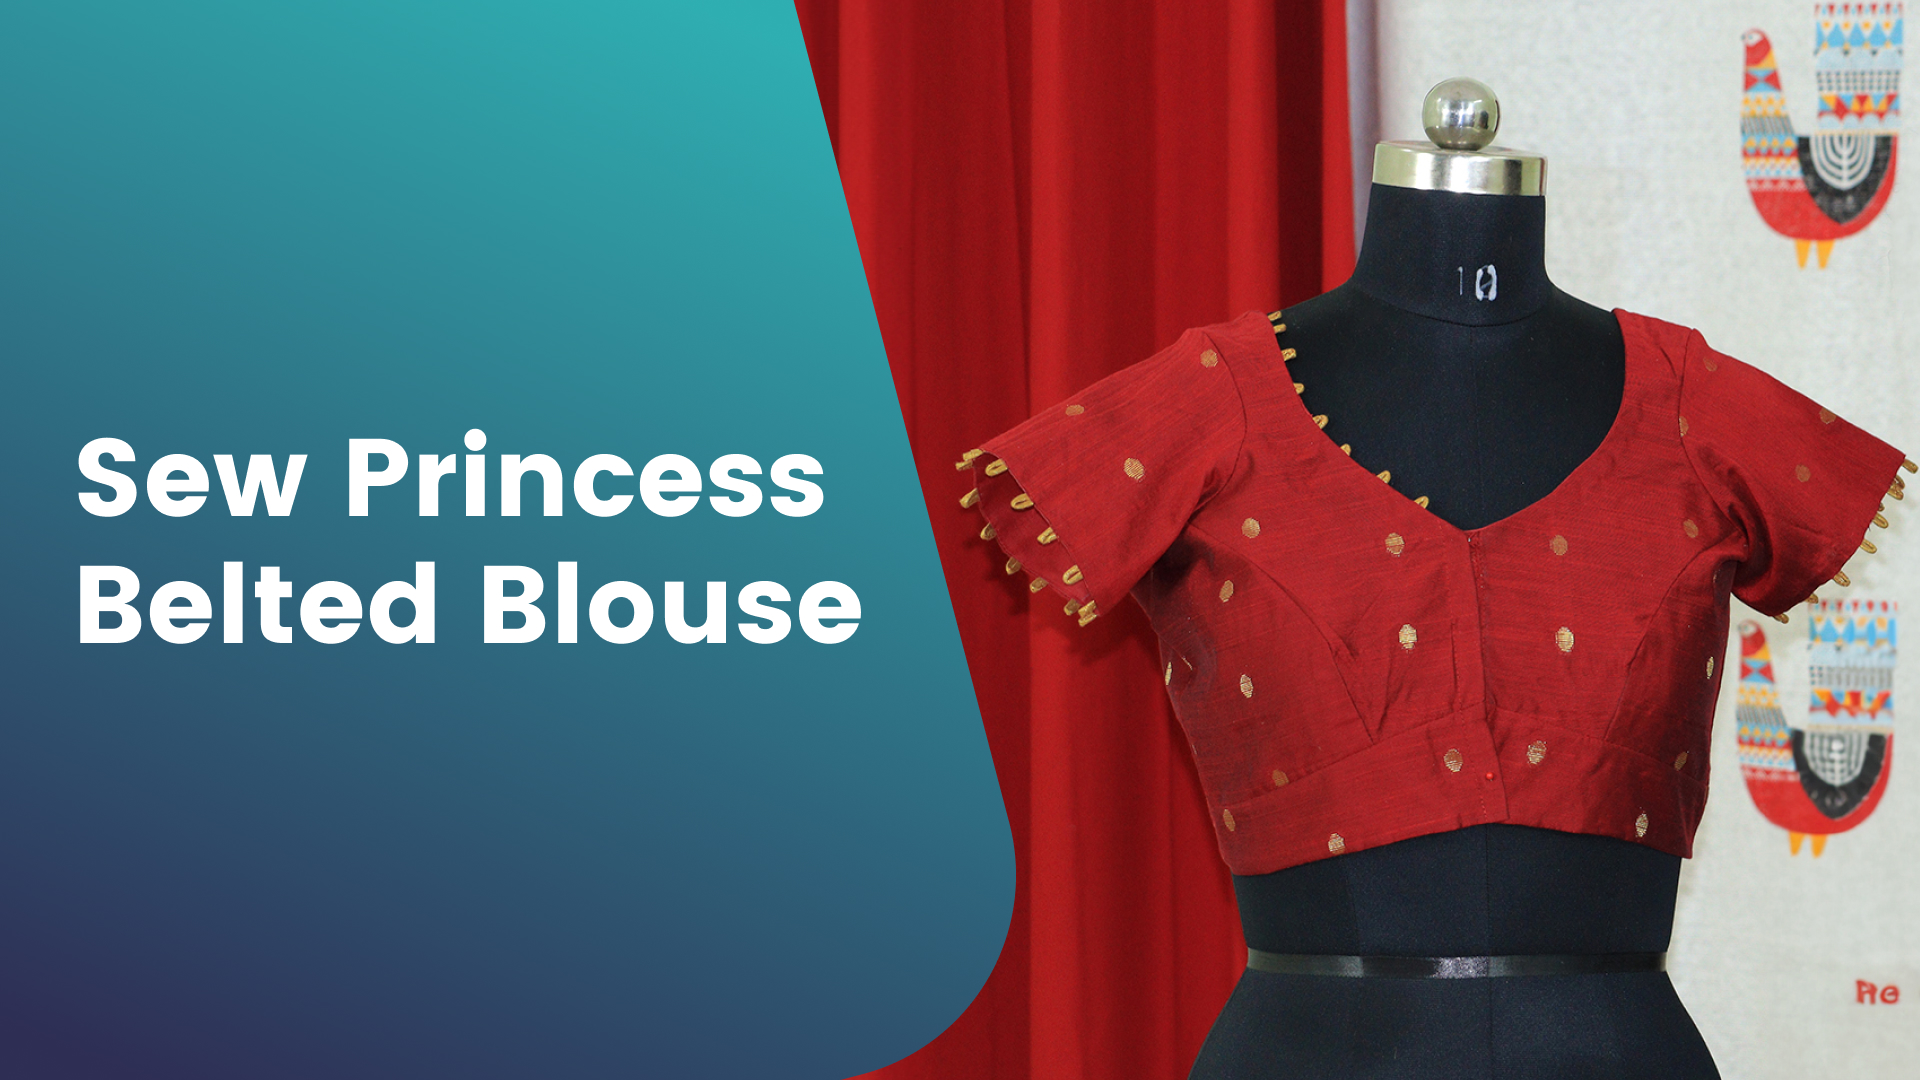 Course Trailer: How to Stitch a Princess Blouse with Belt?. Watch to know more.